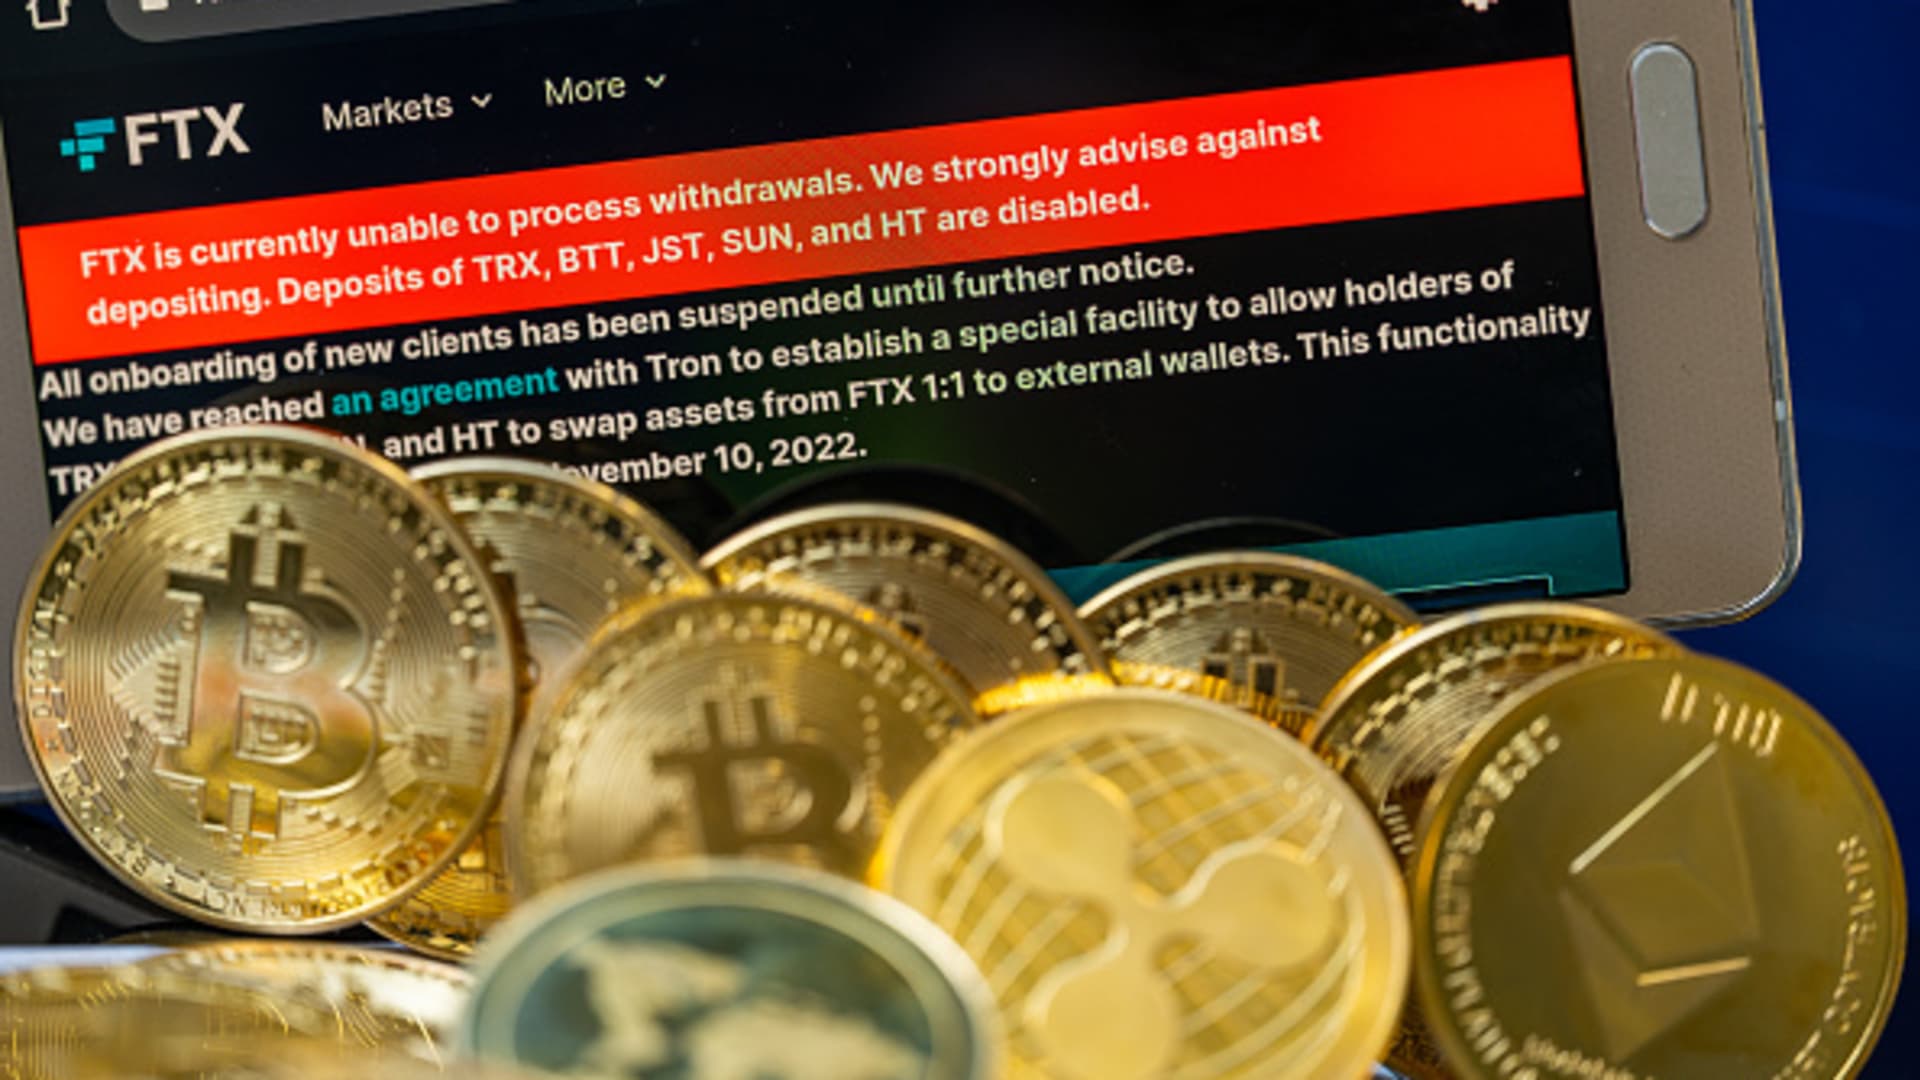 Founders of 3 Arrows Cash pitch platform for crypto bankruptcy claims